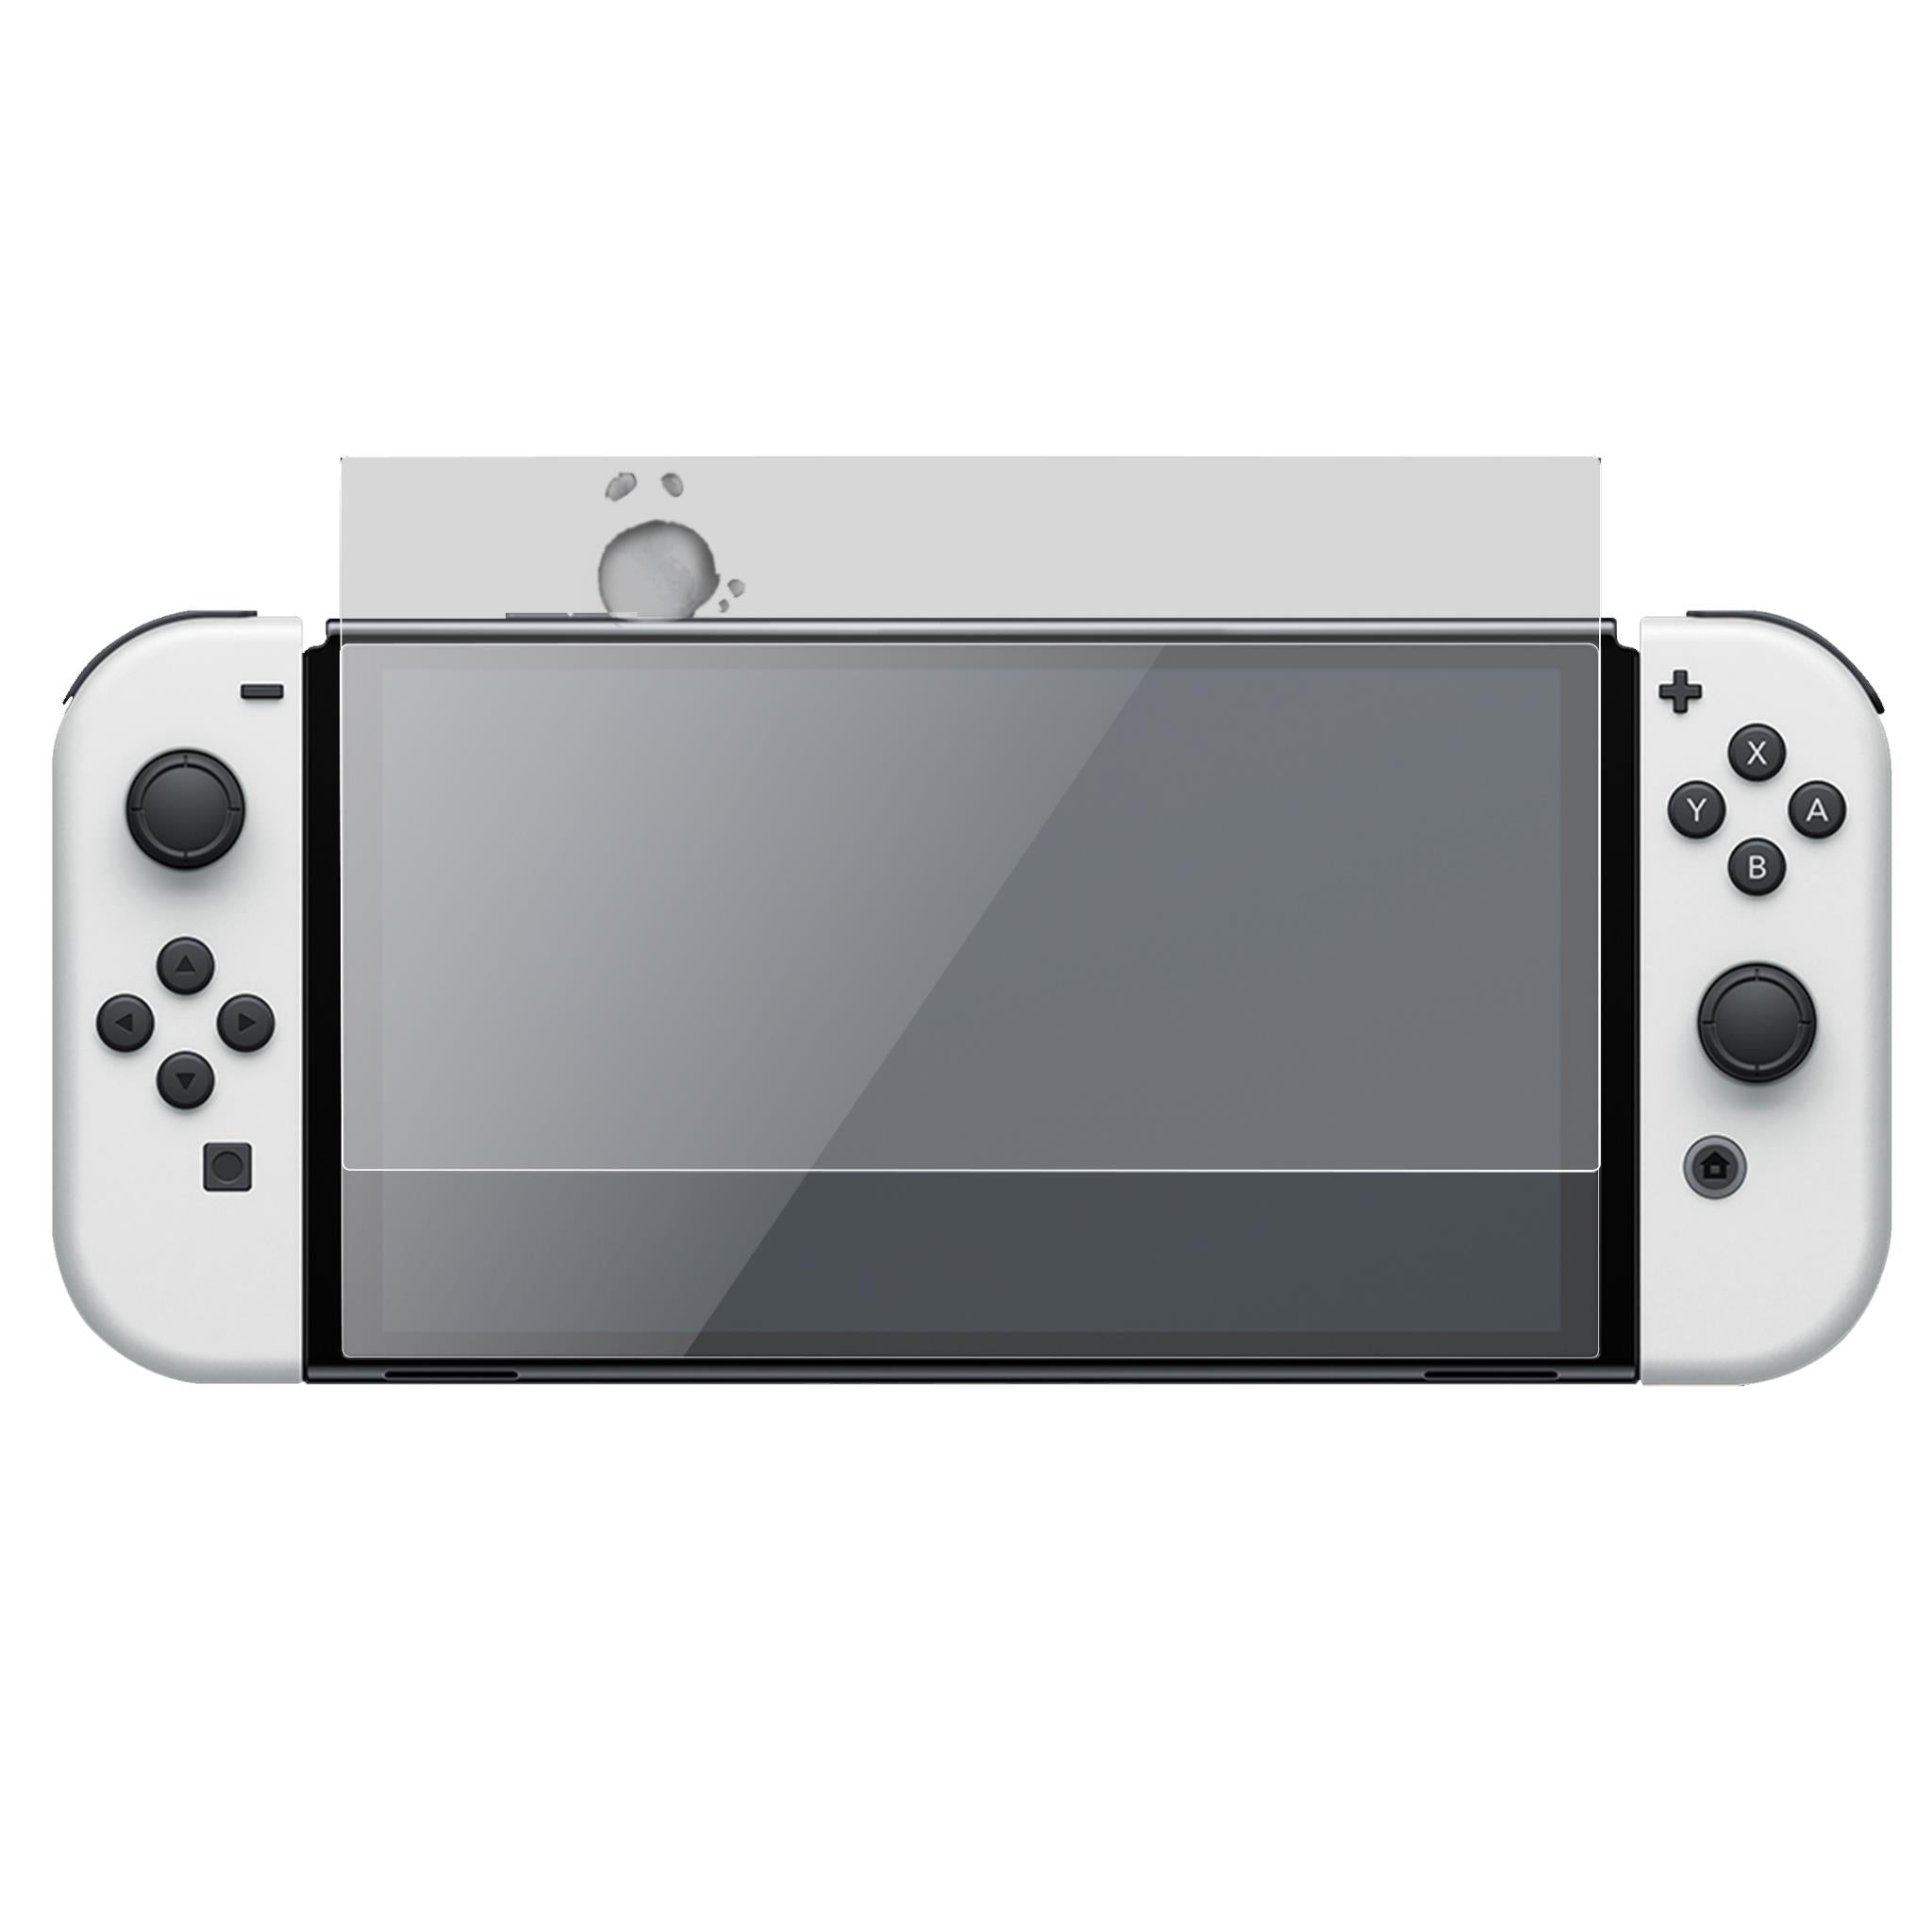 Screen Protective Filter for Switch OLED - Hardware - Nintendo